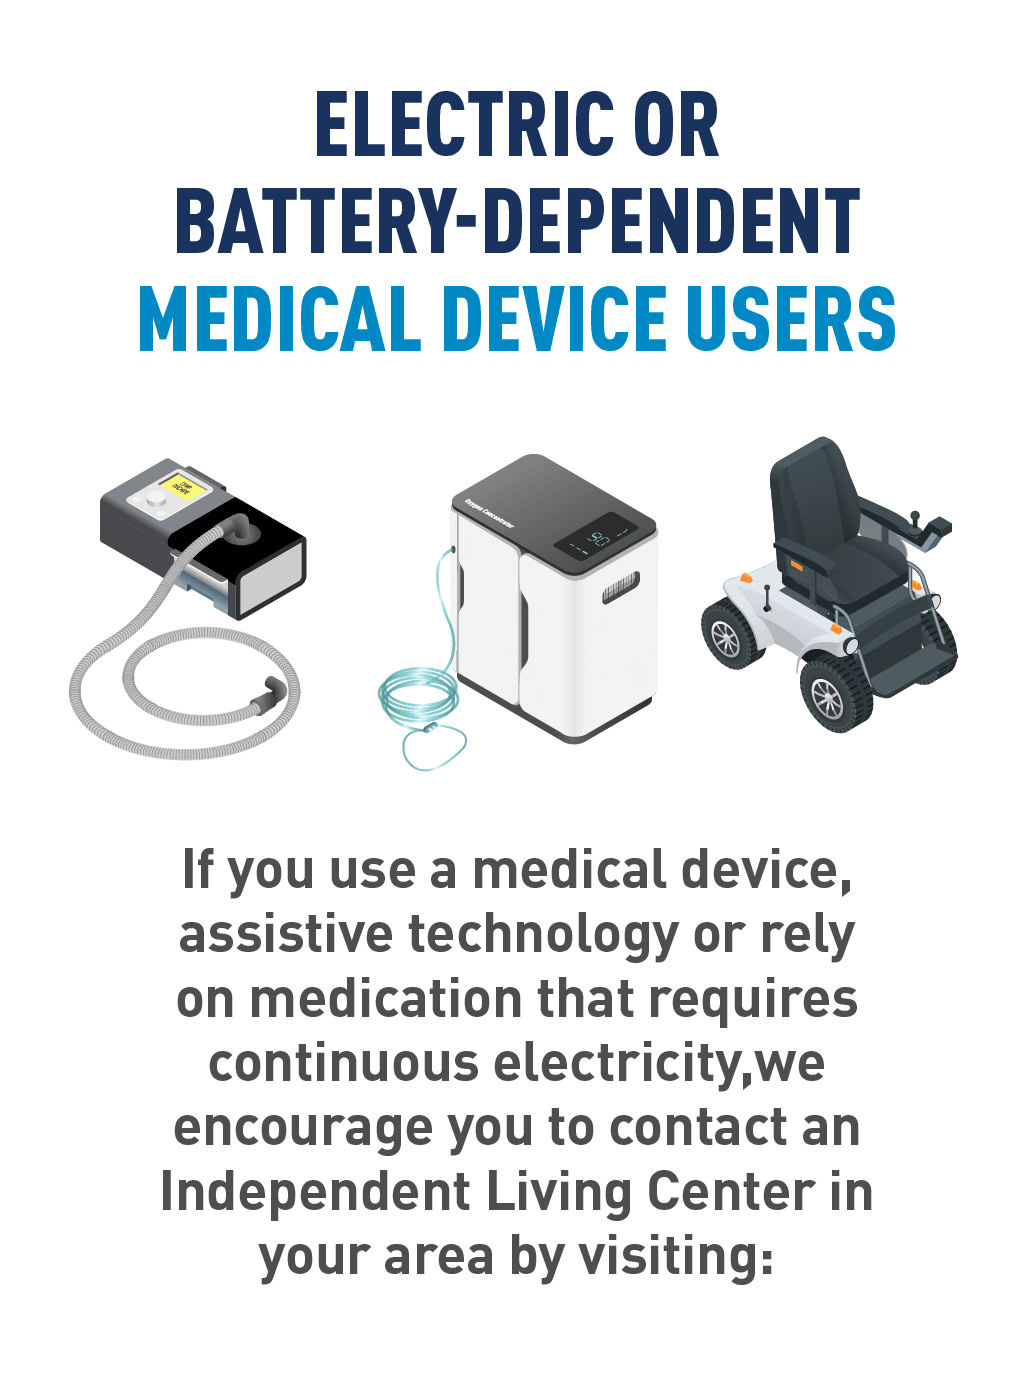 Graphic of electric-powered medical devices